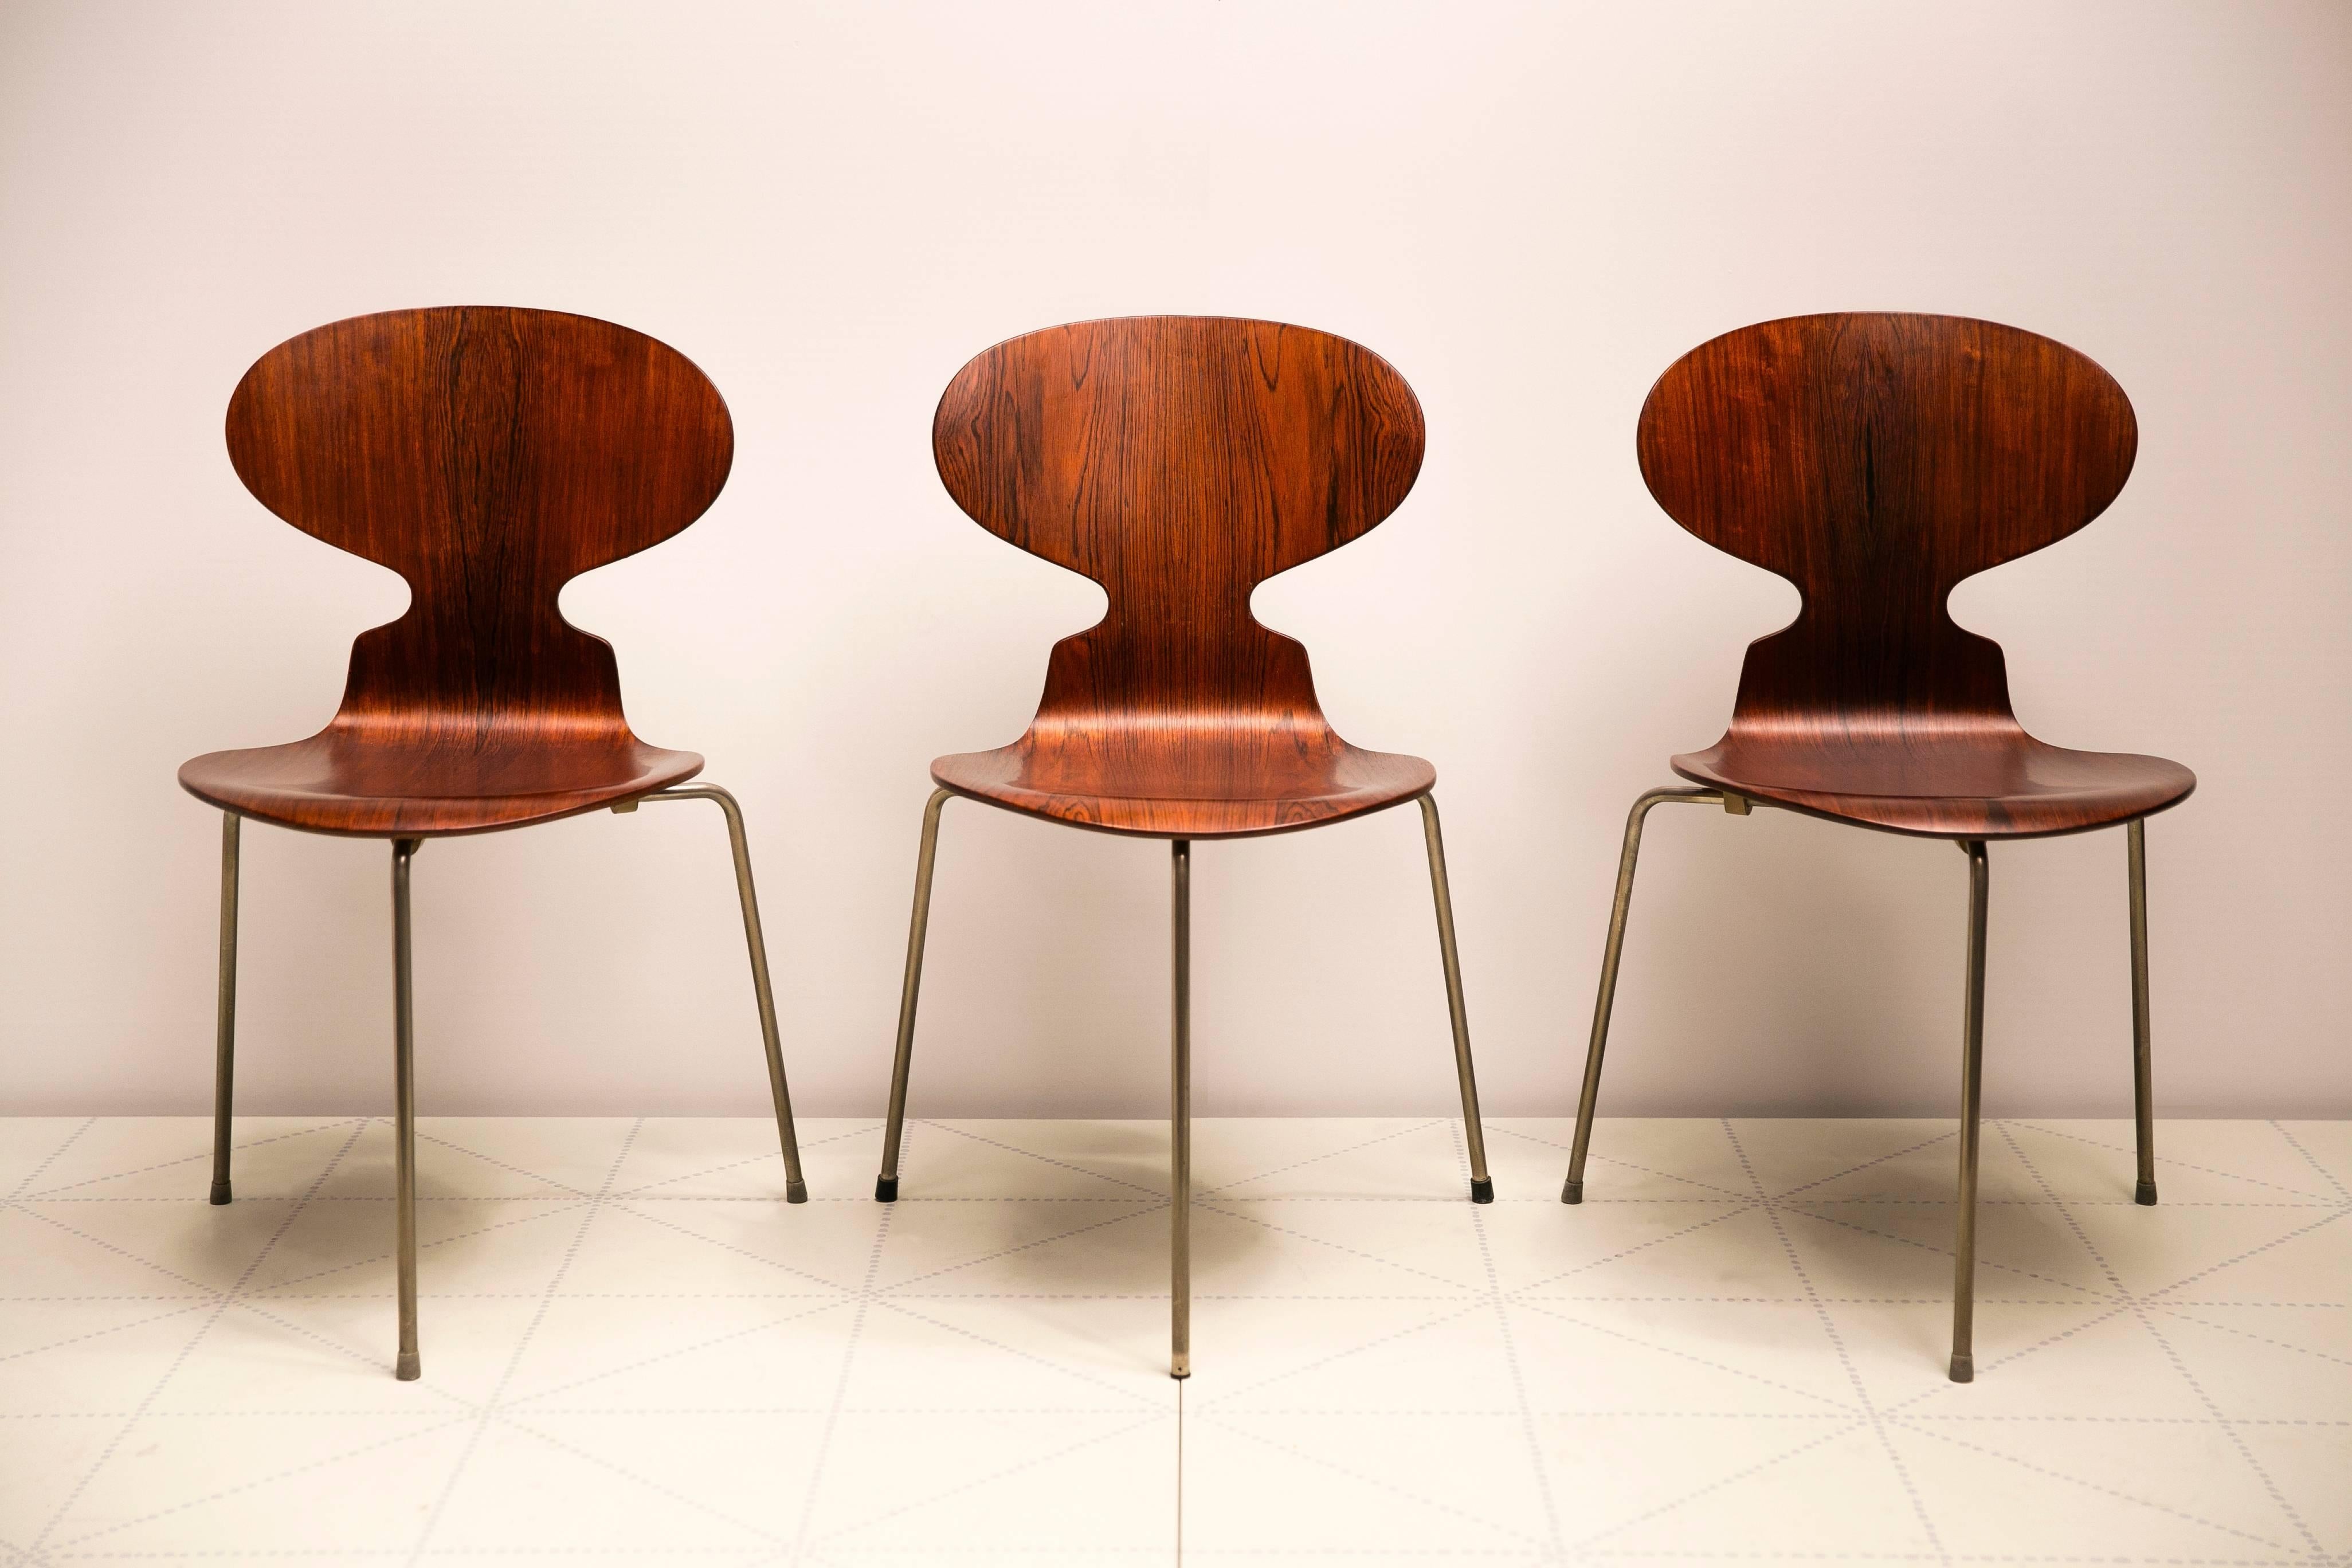 Exceptional Early Brazilian Rosewood Egg Table and Ant Chairs by Arne Jacobsen  im Zustand „Hervorragend“ im Angebot in New York, NY